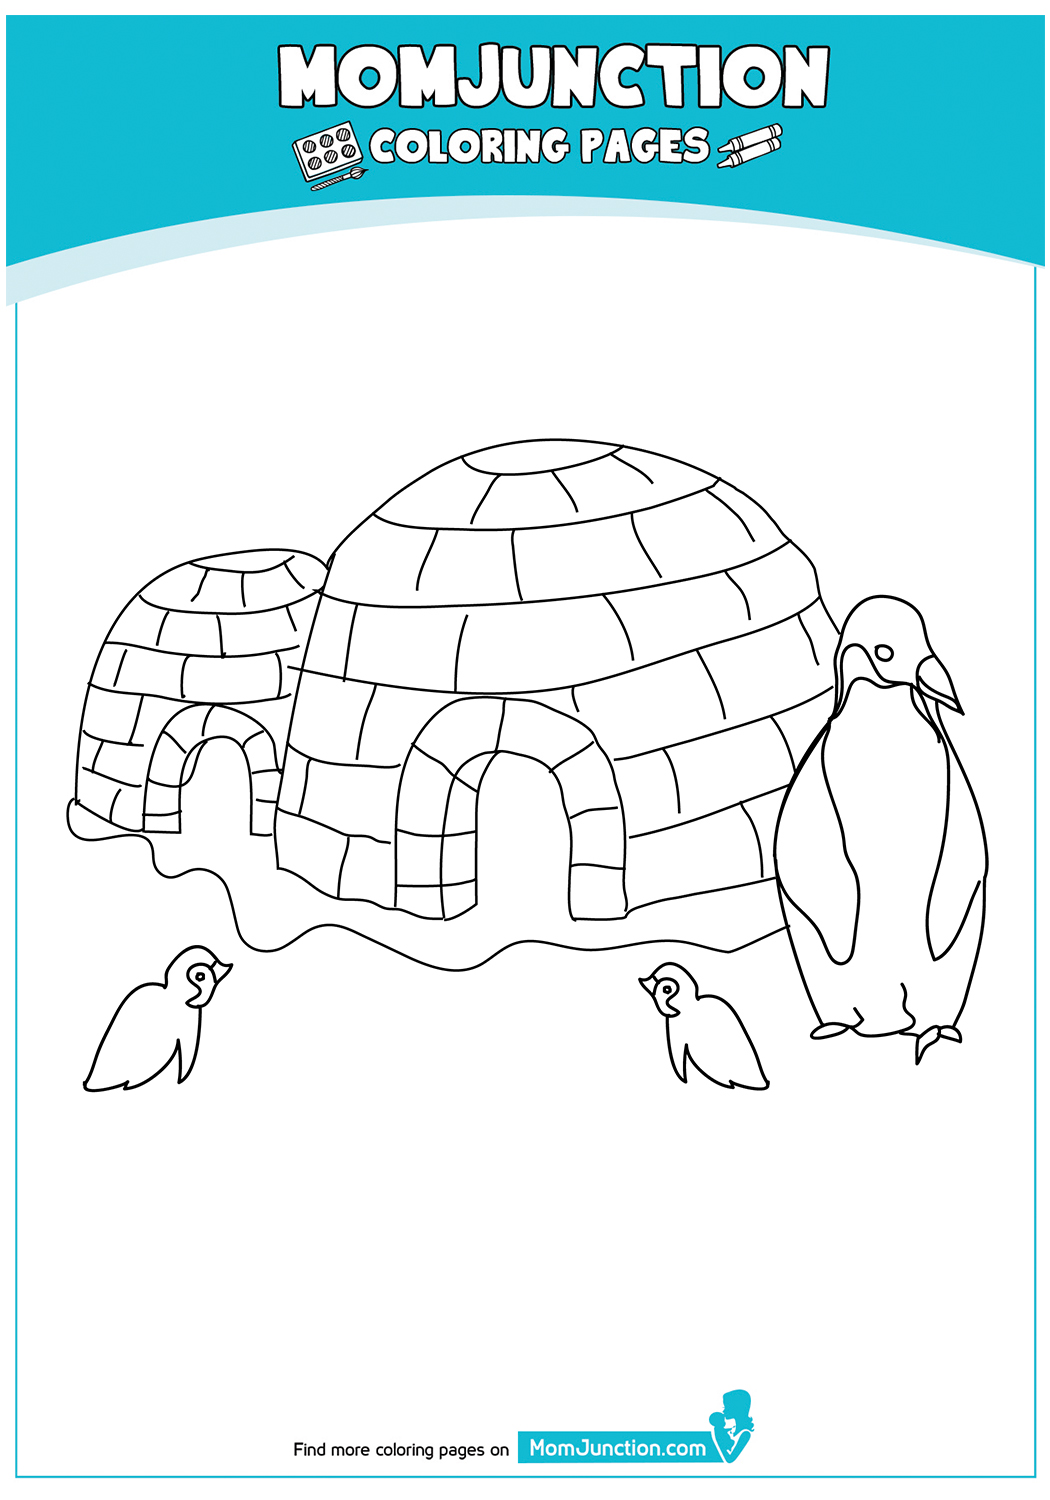 igloo-and-the-penguin-17